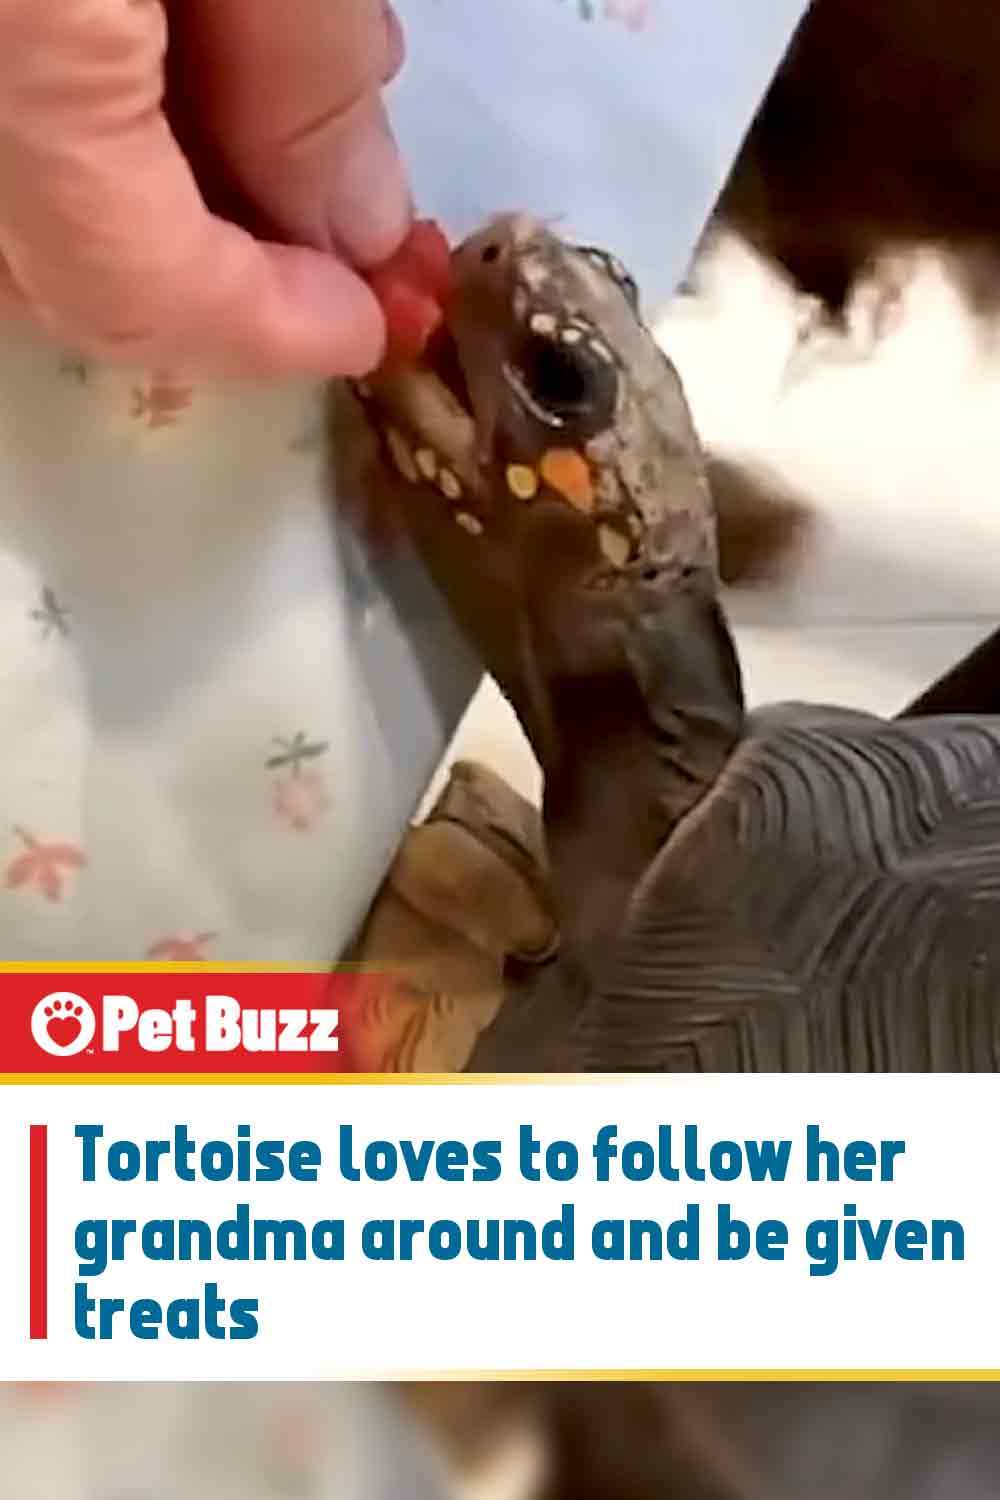 Tortoise loves to follow her grandma around and be given treats